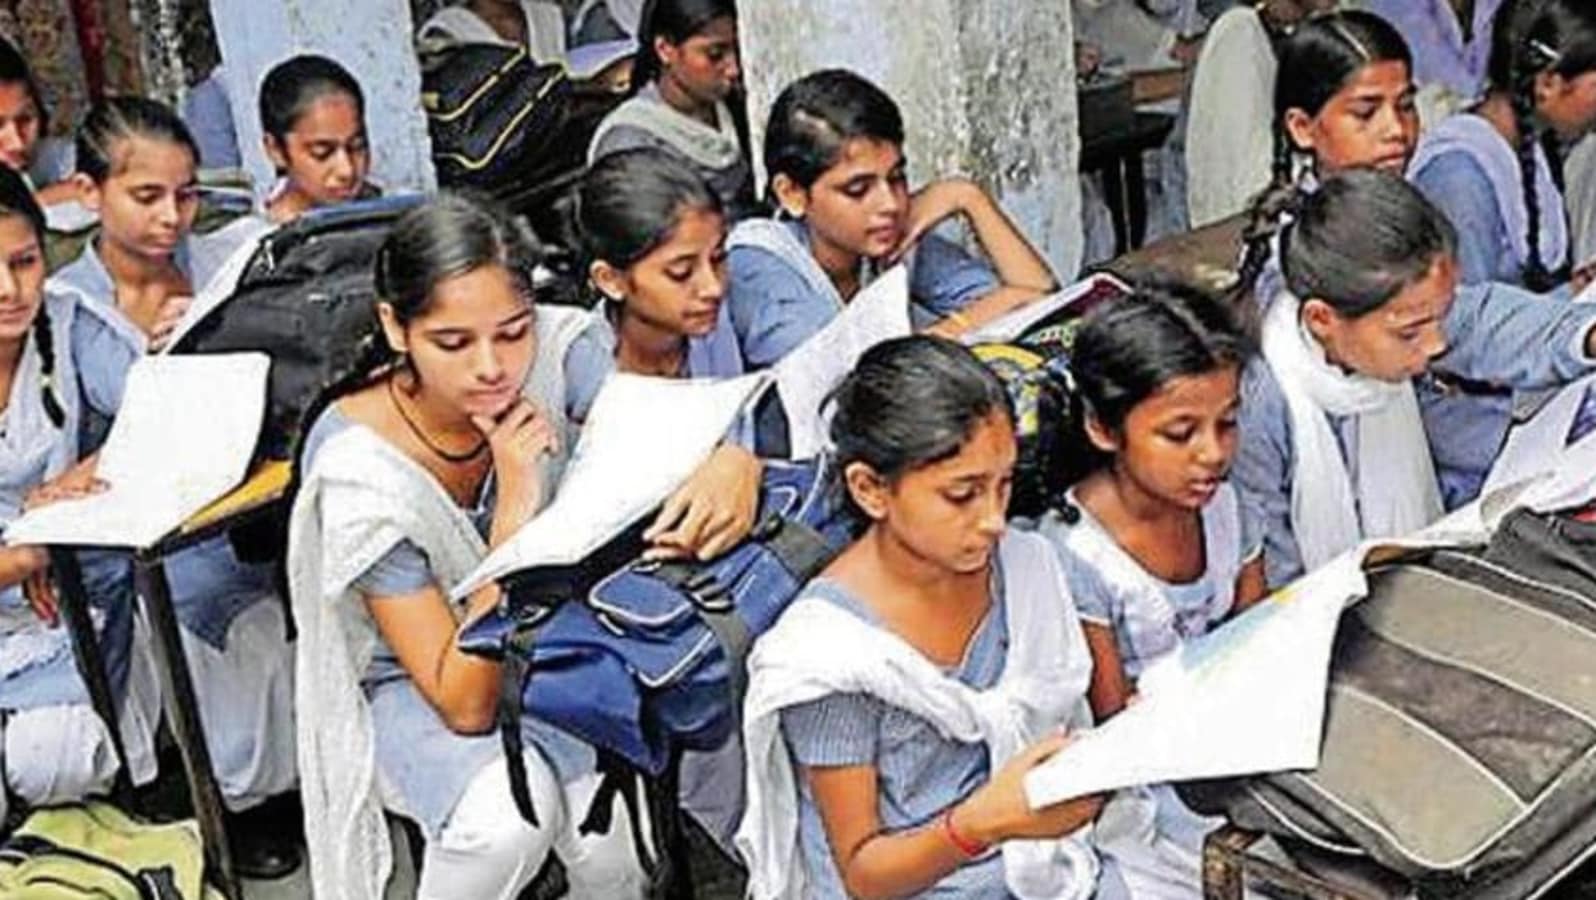 MP Board Exams 2022: MPBSE Class 10, 12 exams to begin from February 12